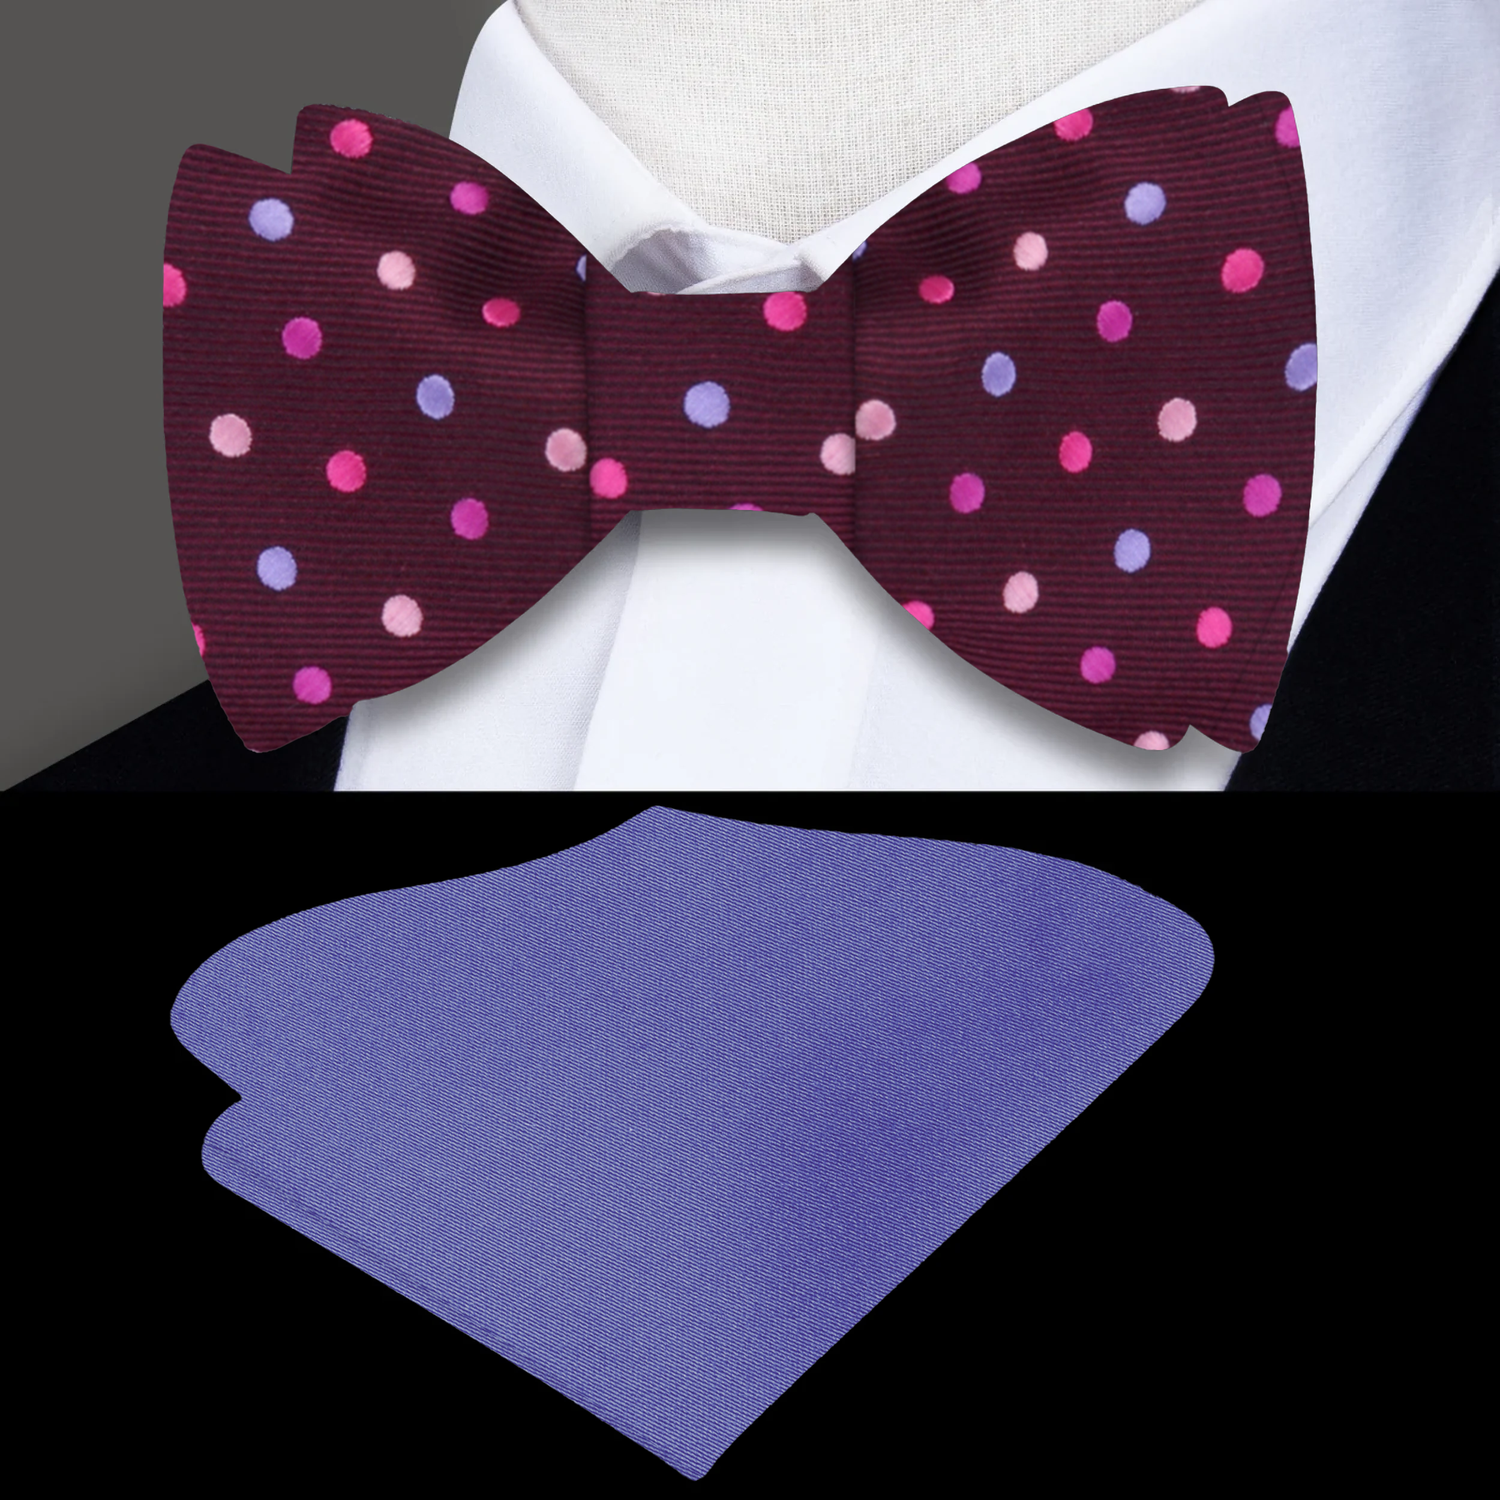 Plum, Peach, Purple Polka Bow Tie and Accenting Pocket Square